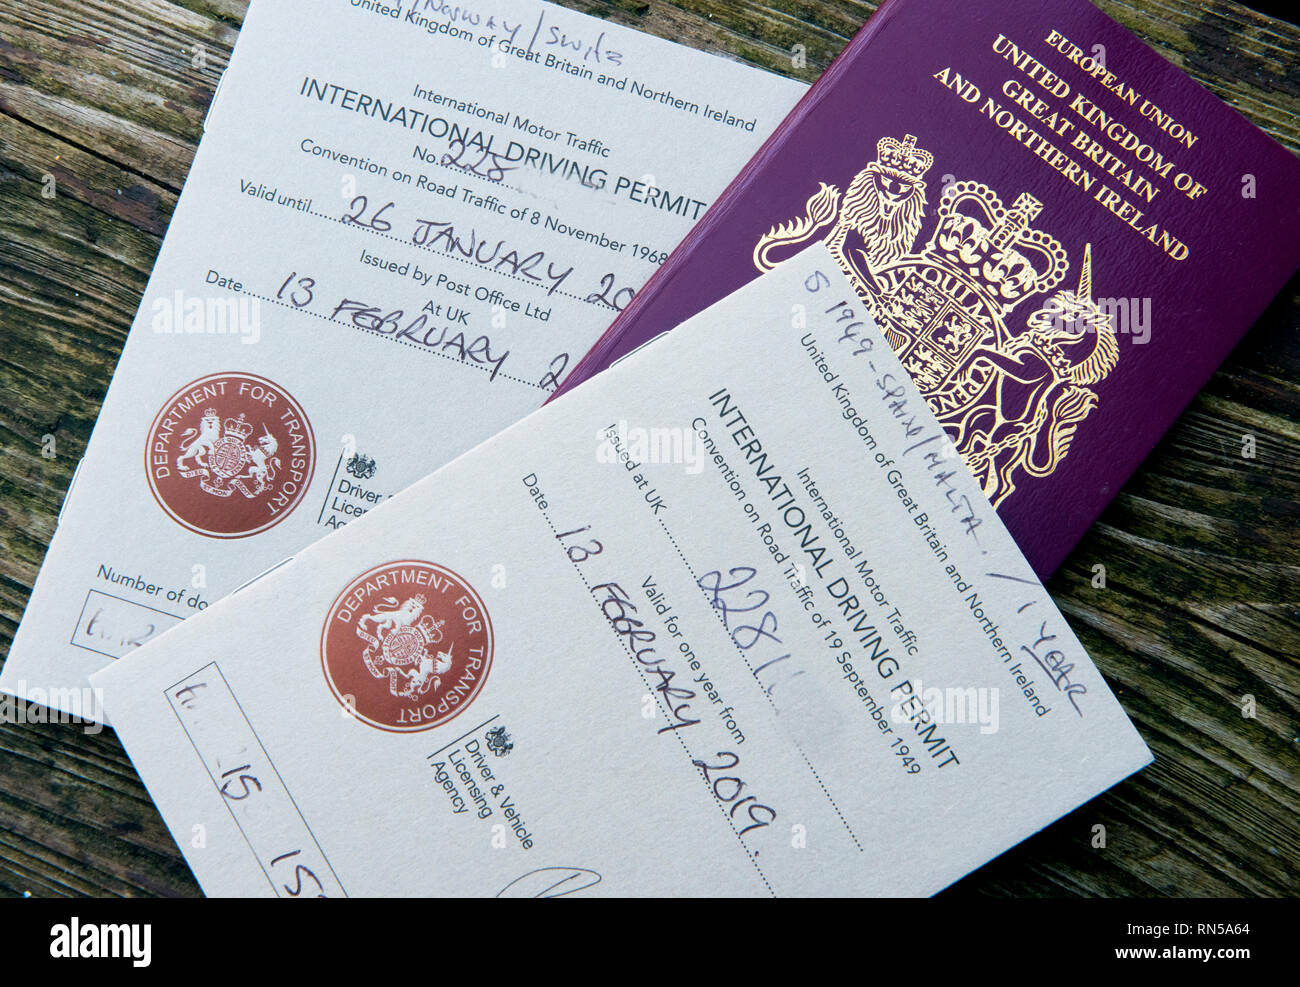 International Driving Permit - IDP  Feb 2019 Showing the 1968 and 1949 versions of the IDP which allow you to drive in certain countries in Europe use Stock Photo